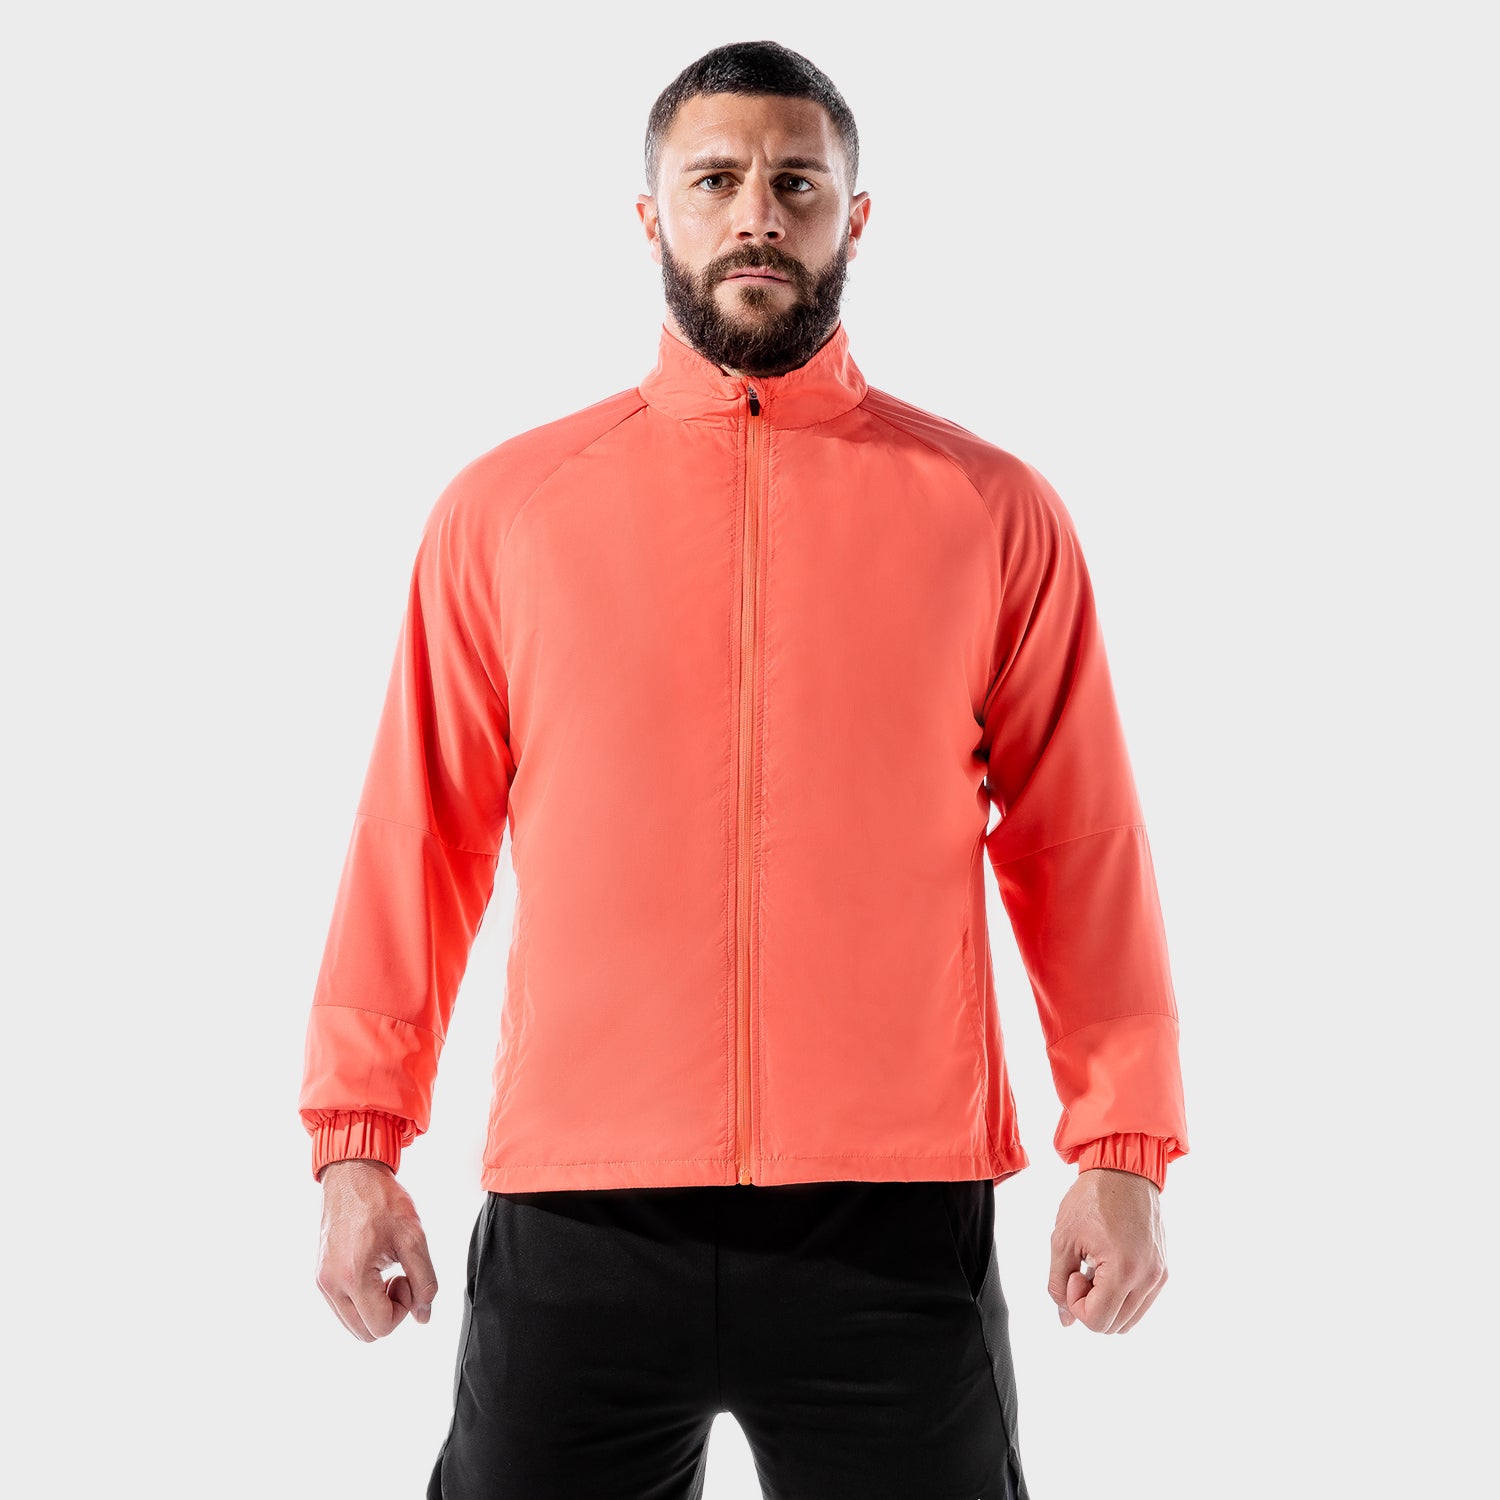 squatwolf-gym-wear-lab-360-performance-windbreaker-red-workout-hoodies-for-men